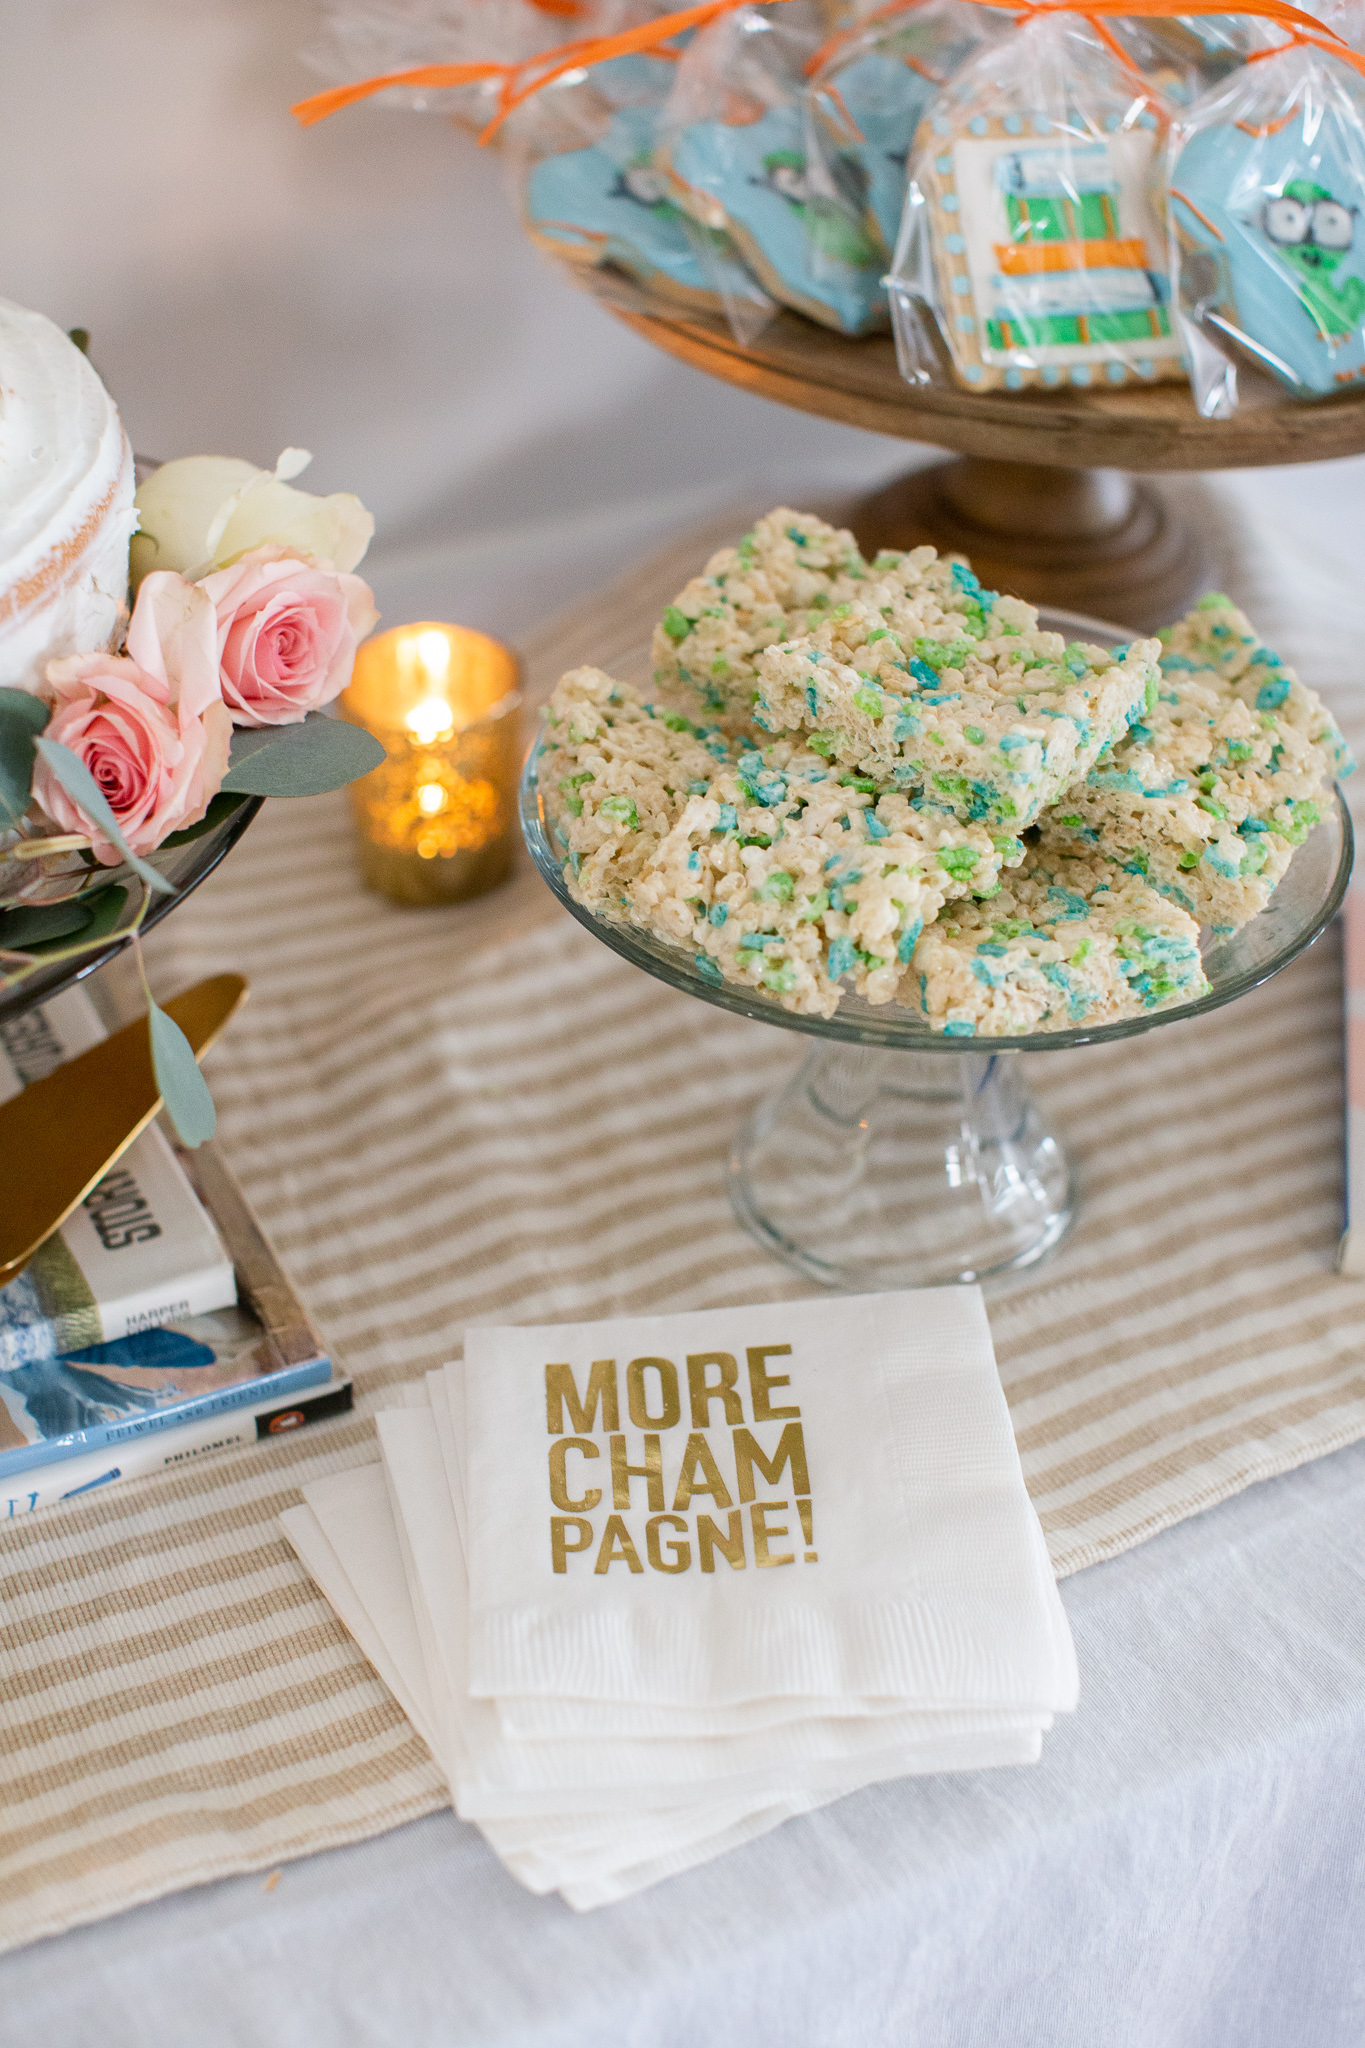  Story Book Baby Shower Ideas by popular North Carolina life and style blog, Coffee Beans and Bobby Pins: image of green and blue rice krispie treats, decorative napkins and book worm cookie favors.